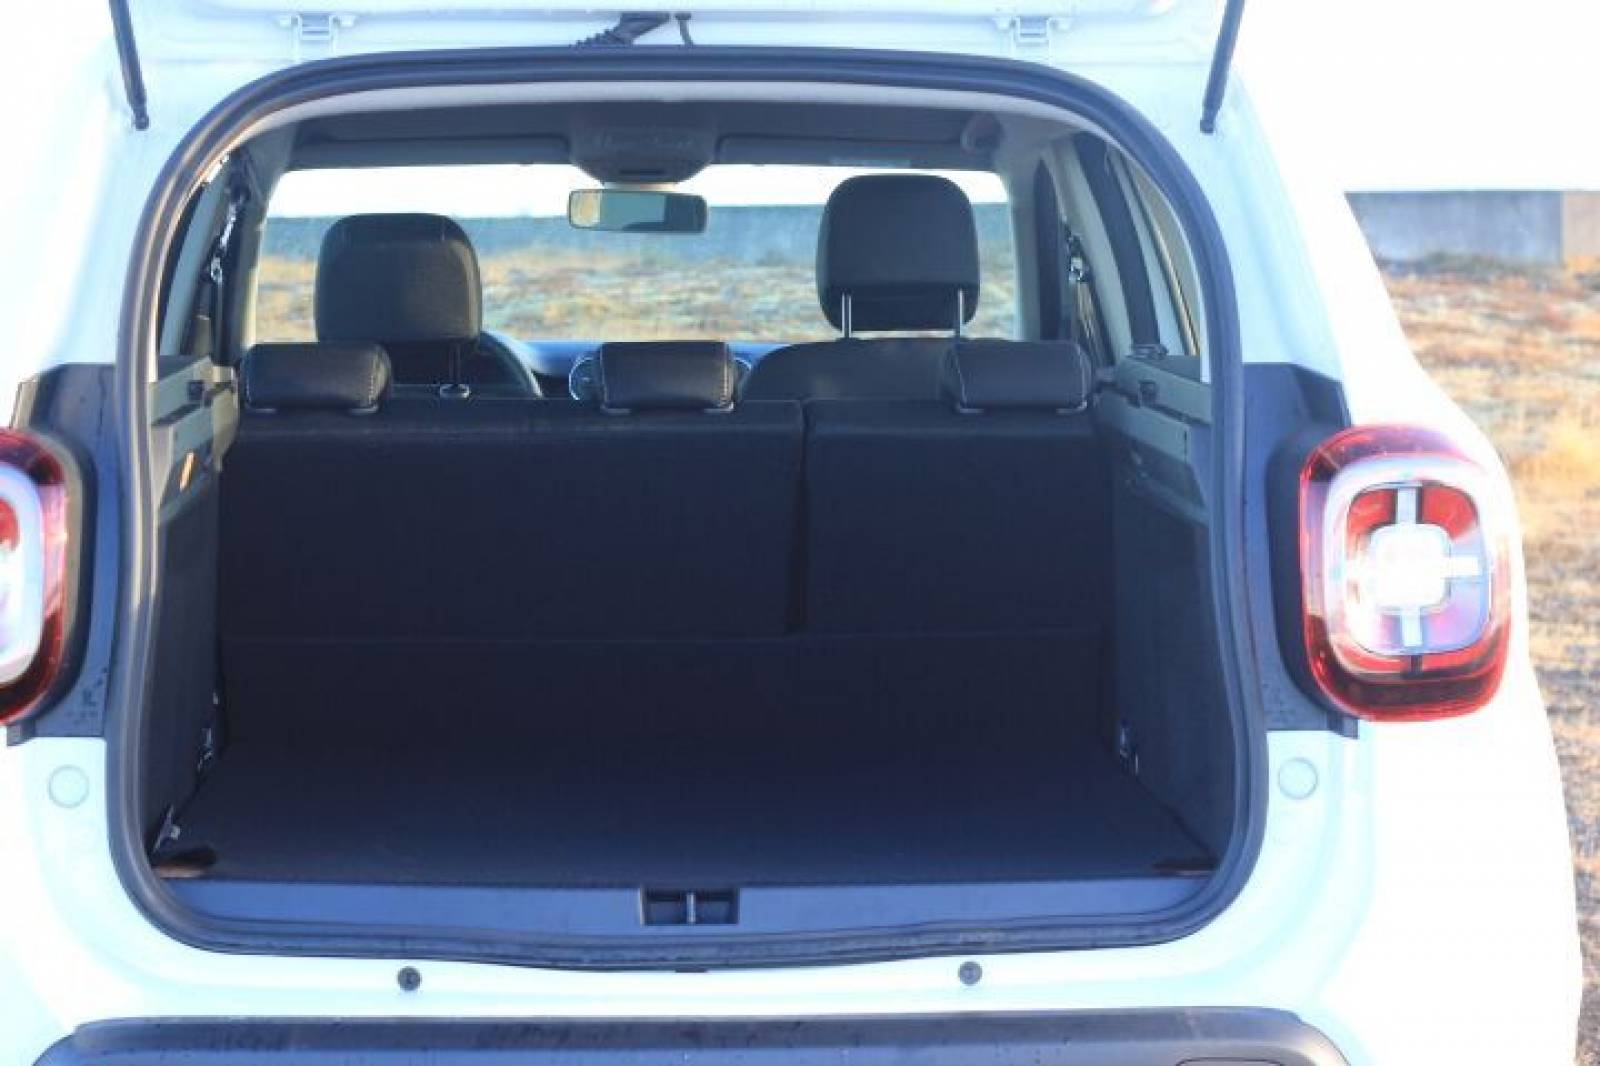 Dacia Duster luggage space